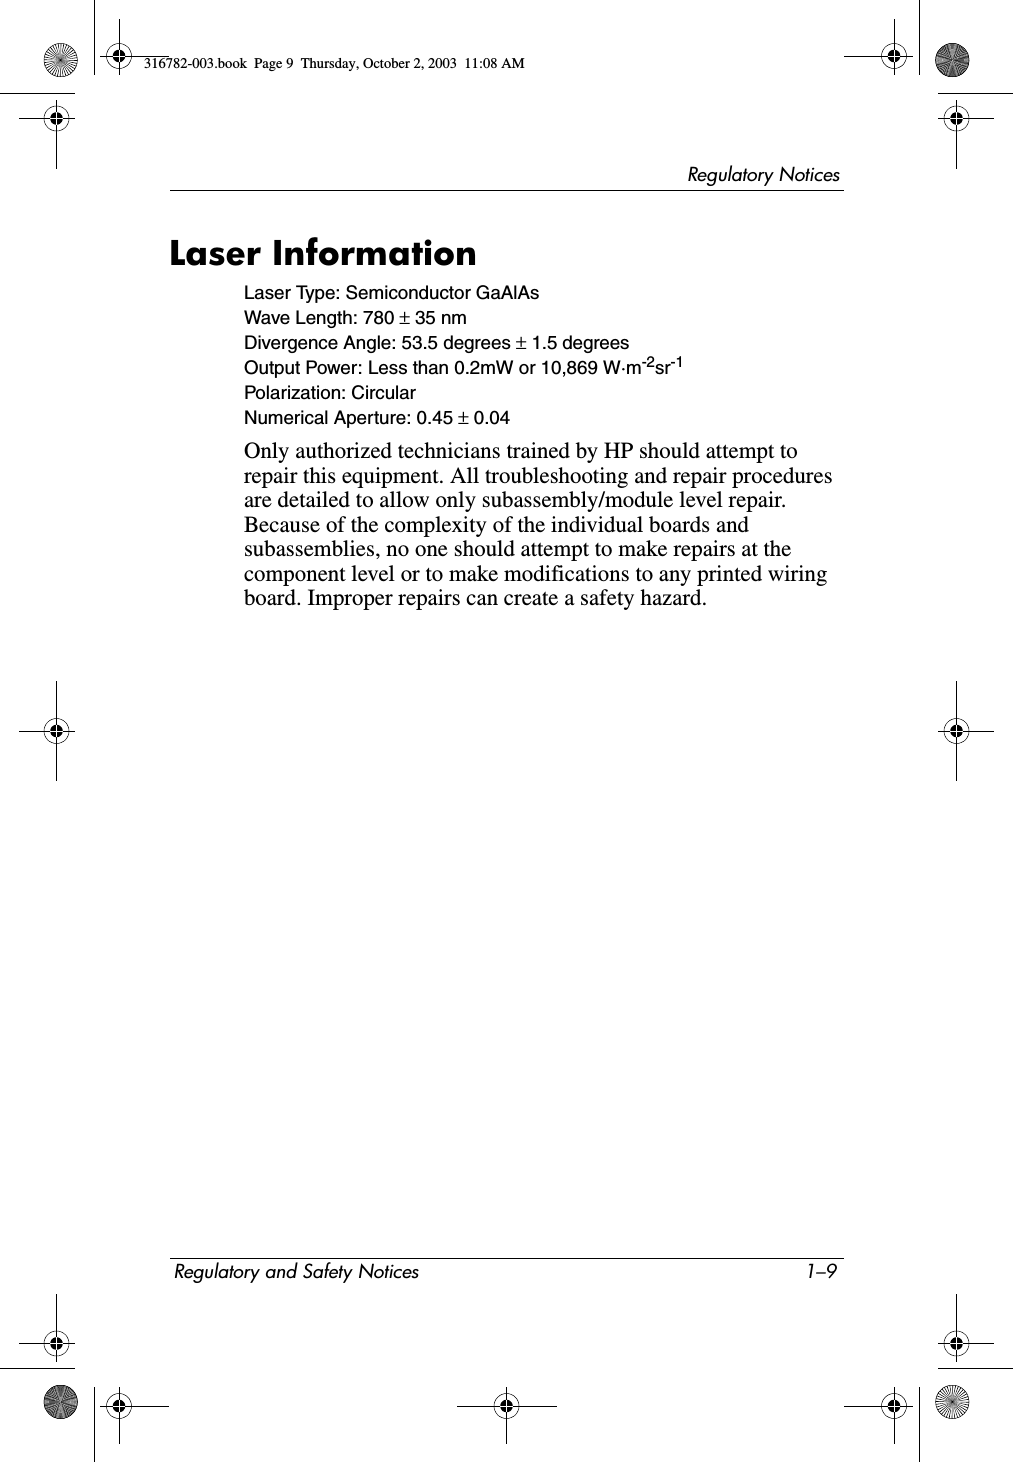 Regulatory NoticesRegulatory and Safety Notices 1–9Laser InformationLaser Type: Semiconductor GaAlAsWave Length: 780 ± 35 nmDivergence Angle: 53.5 degrees ± 1.5 degreesOutput Power: Less than 0.2mW or 10,869 W·m-2sr-1Polarization: CircularNumerical Aperture: 0.45 ± 0.04Only authorized technicians trained by HP should attempt to repair this equipment. All troubleshooting and repair procedures are detailed to allow only subassembly/module level repair. Because of the complexity of the individual boards and subassemblies, no one should attempt to make repairs at the component level or to make modifications to any printed wiring board. Improper repairs can create a safety hazard.316782-003.book  Page 9  Thursday, October 2, 2003  11:08 AM